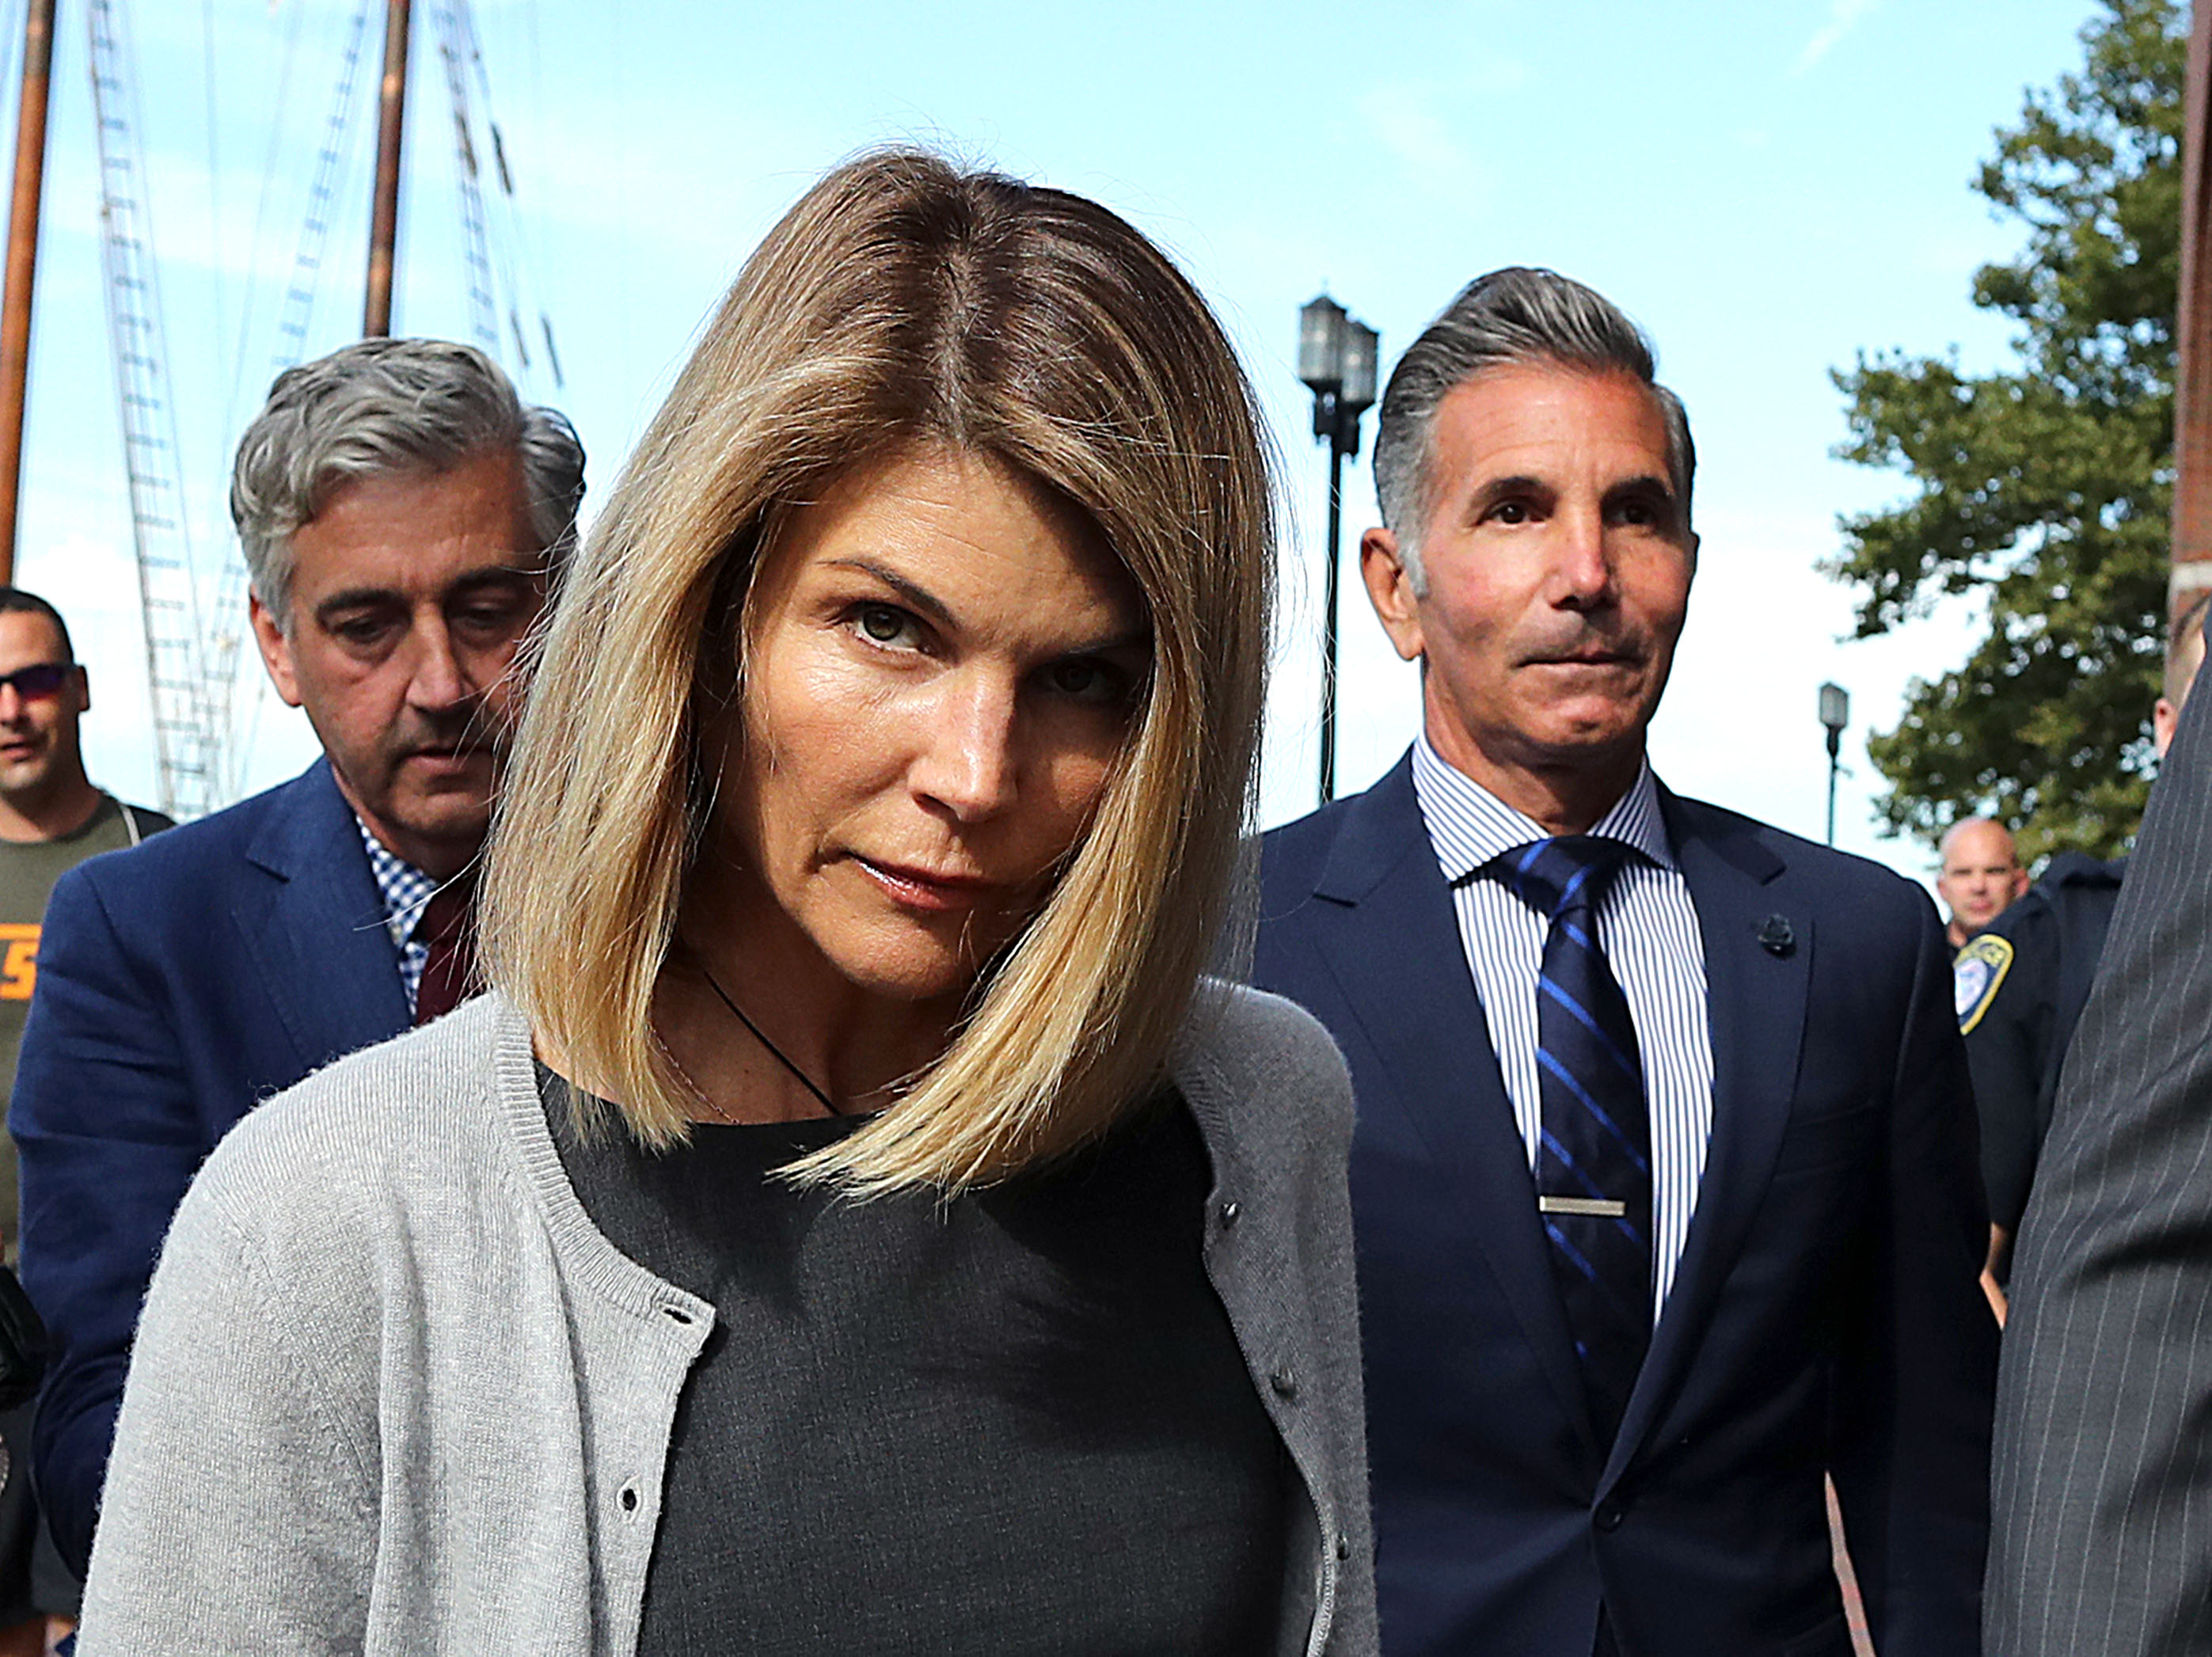 Lori Loughlin and her husband Mossimo Giannulli, on the right, leaving the courthouse on August 27, 2019 | Source: Getty Images